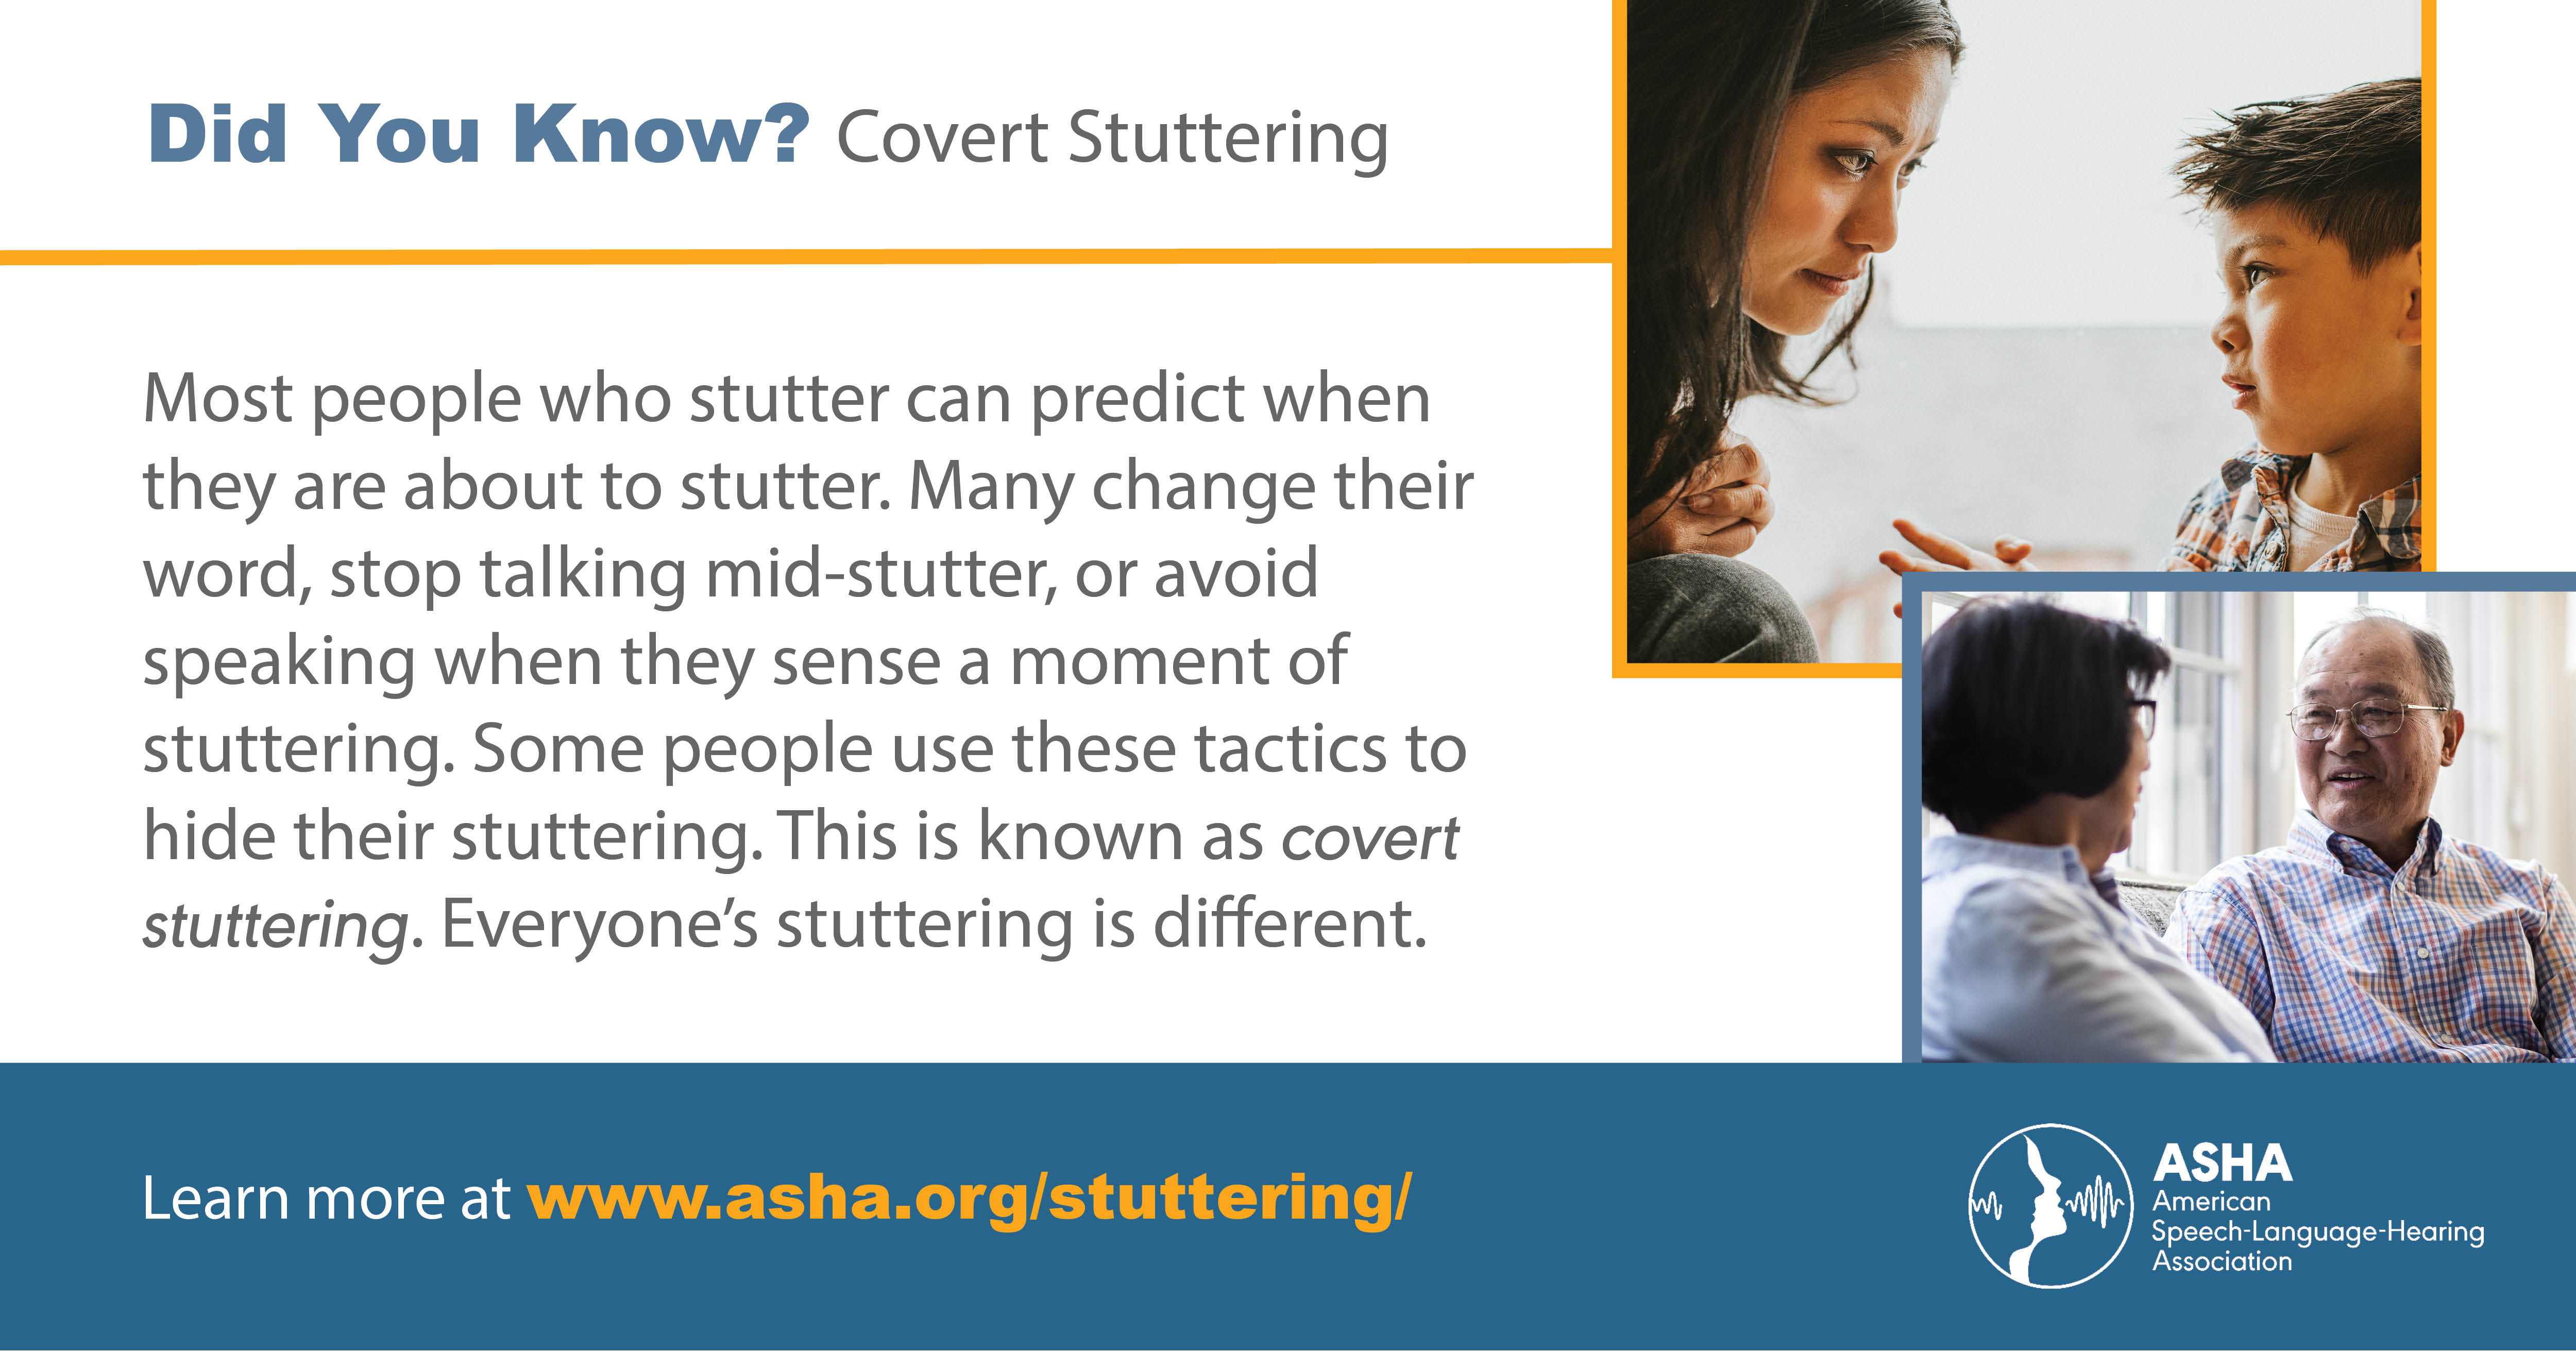 Covert Stuttering: Did You Know